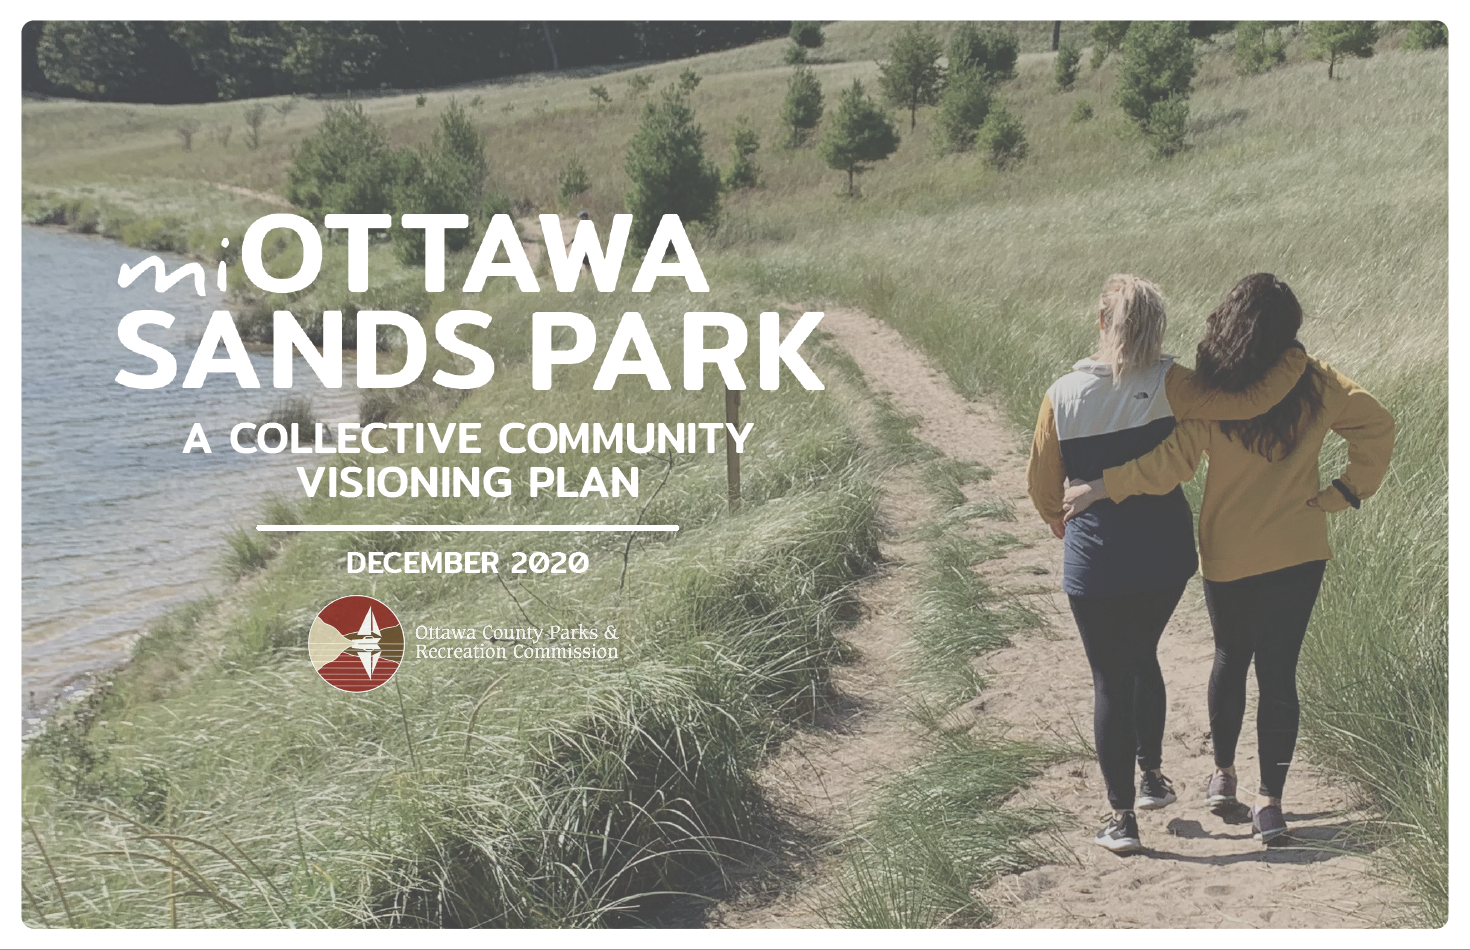 miOttawa Sands Park - A Collective Community Visioning Plan